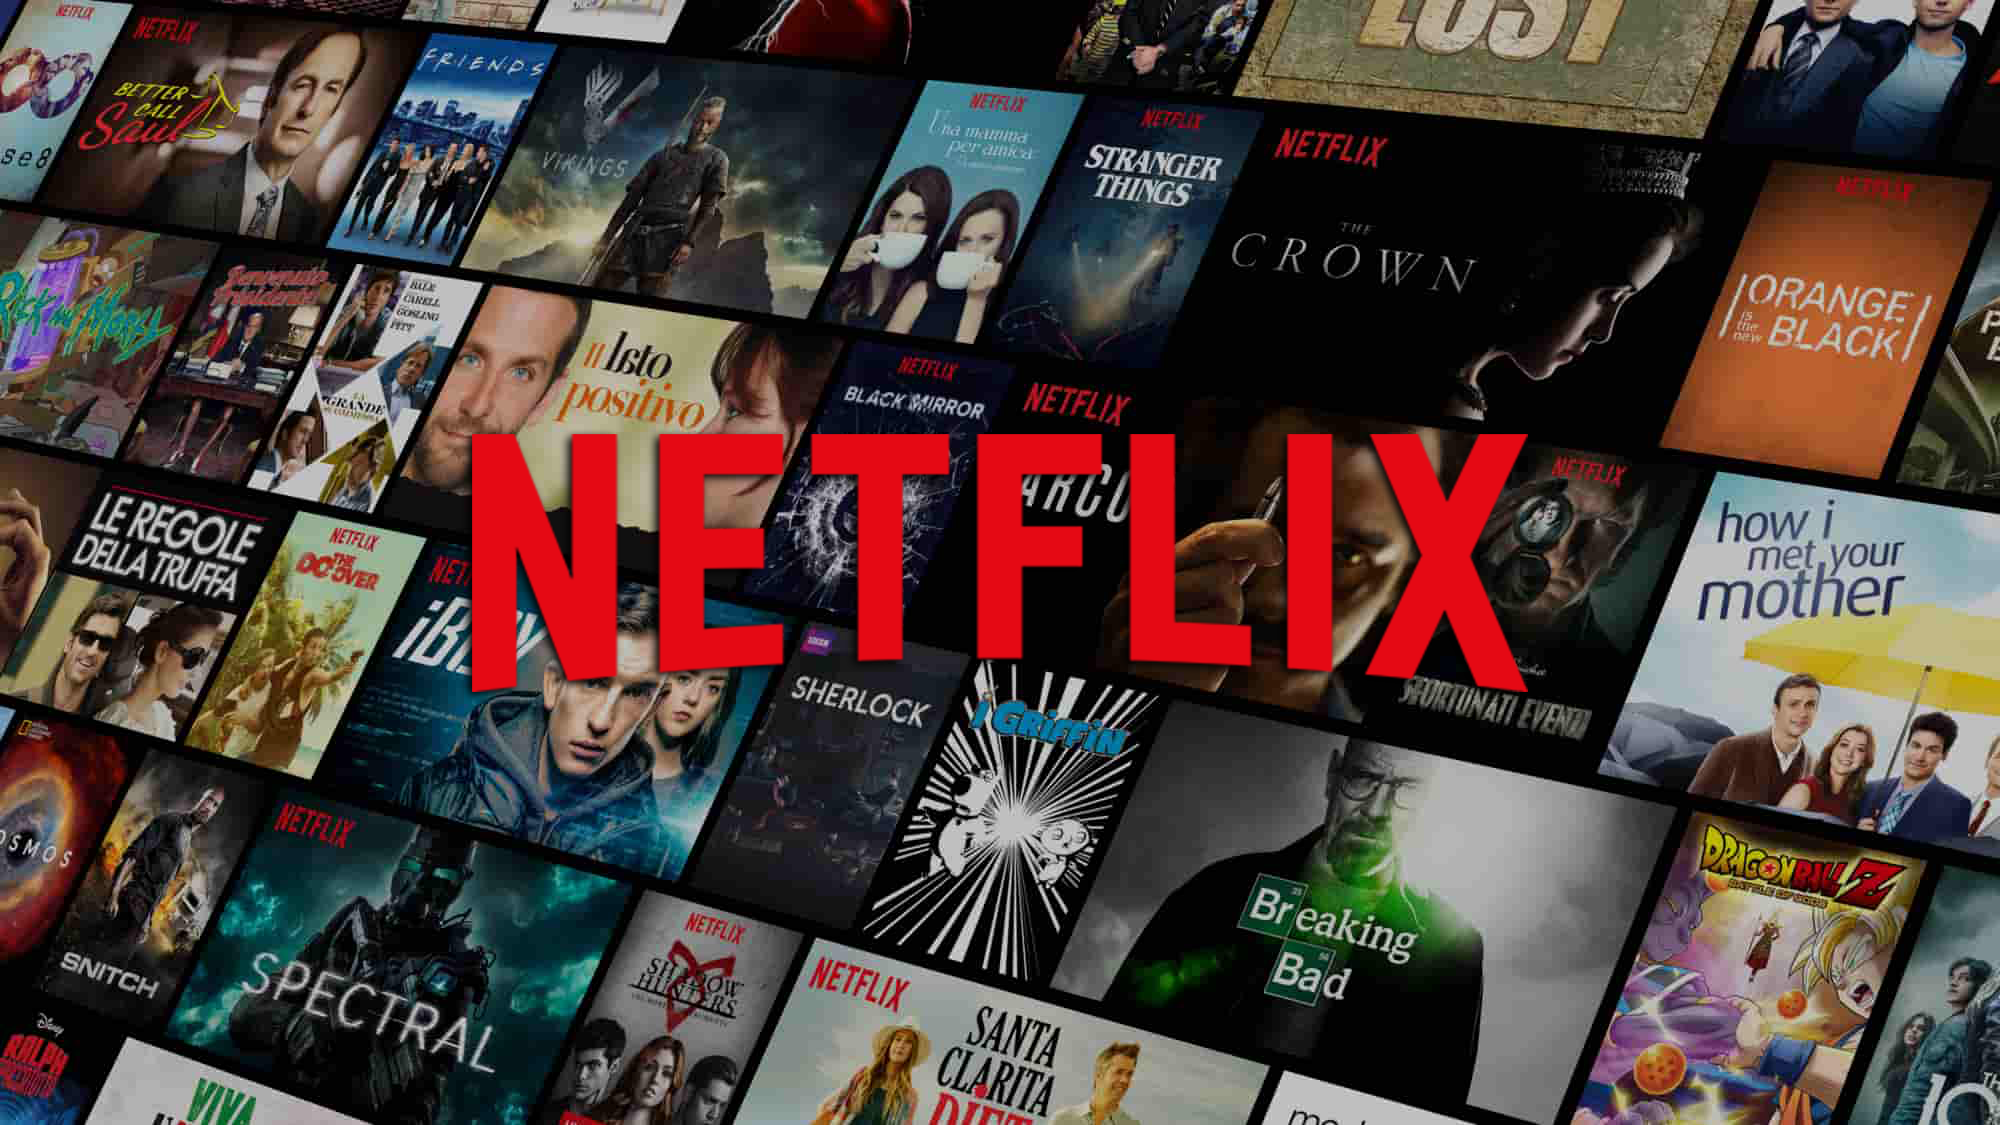 Netflix Adds Almost 16 Million Subscribers In The Last Three Months